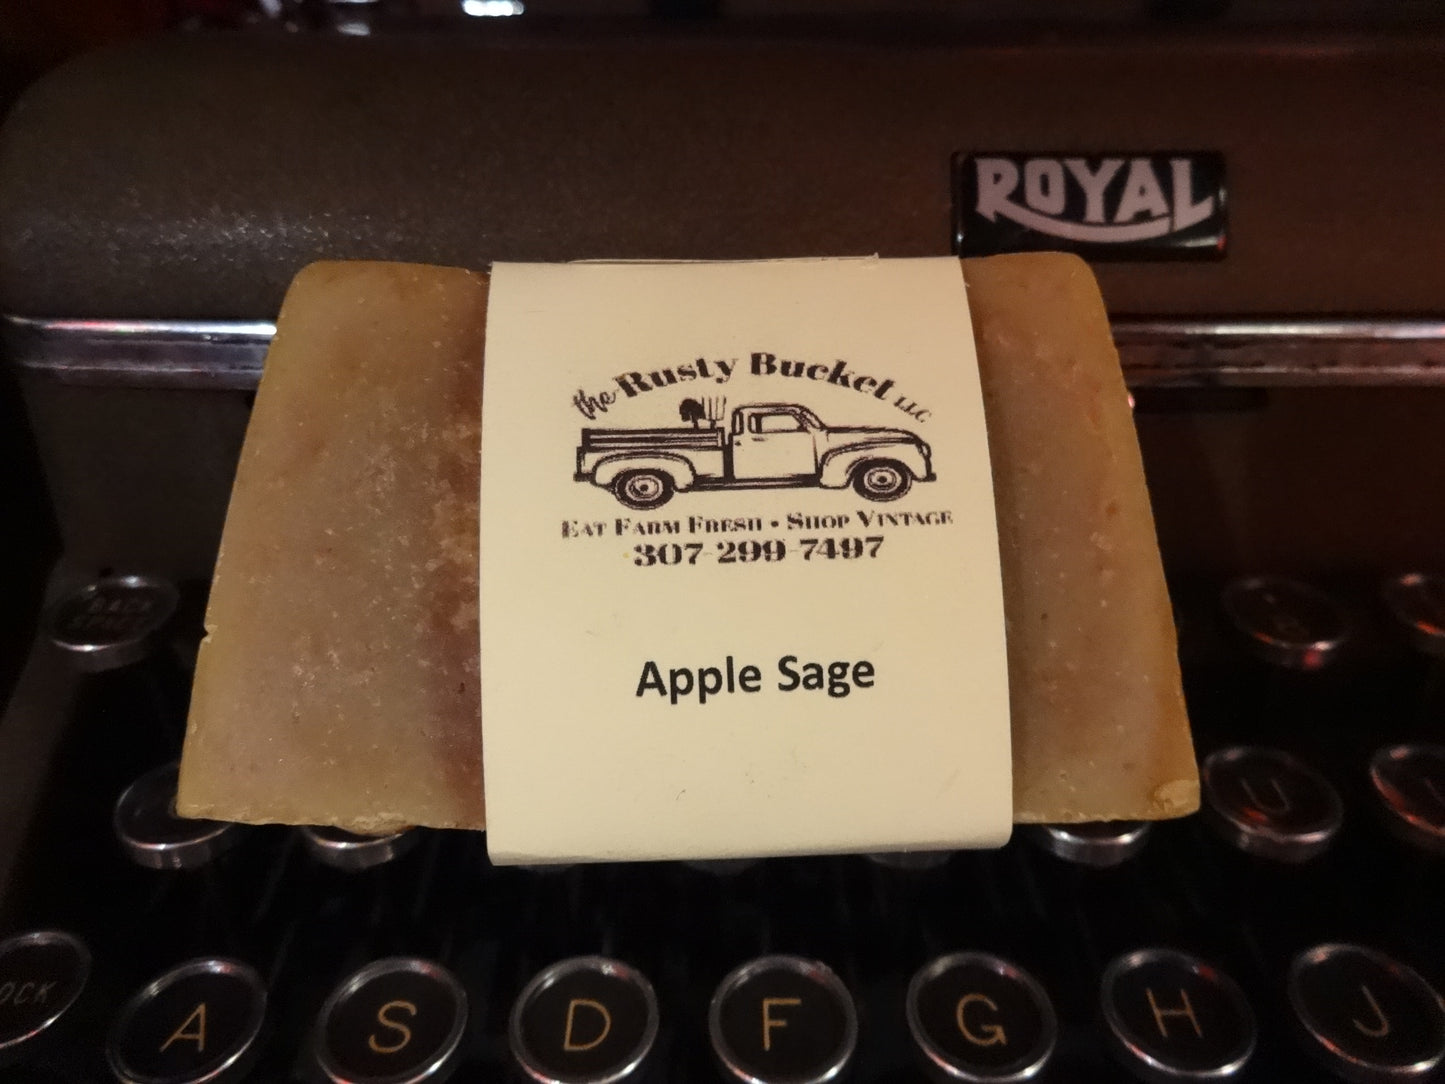 Goat Milk Soap-Handcrafted in Rozet, Wyoming